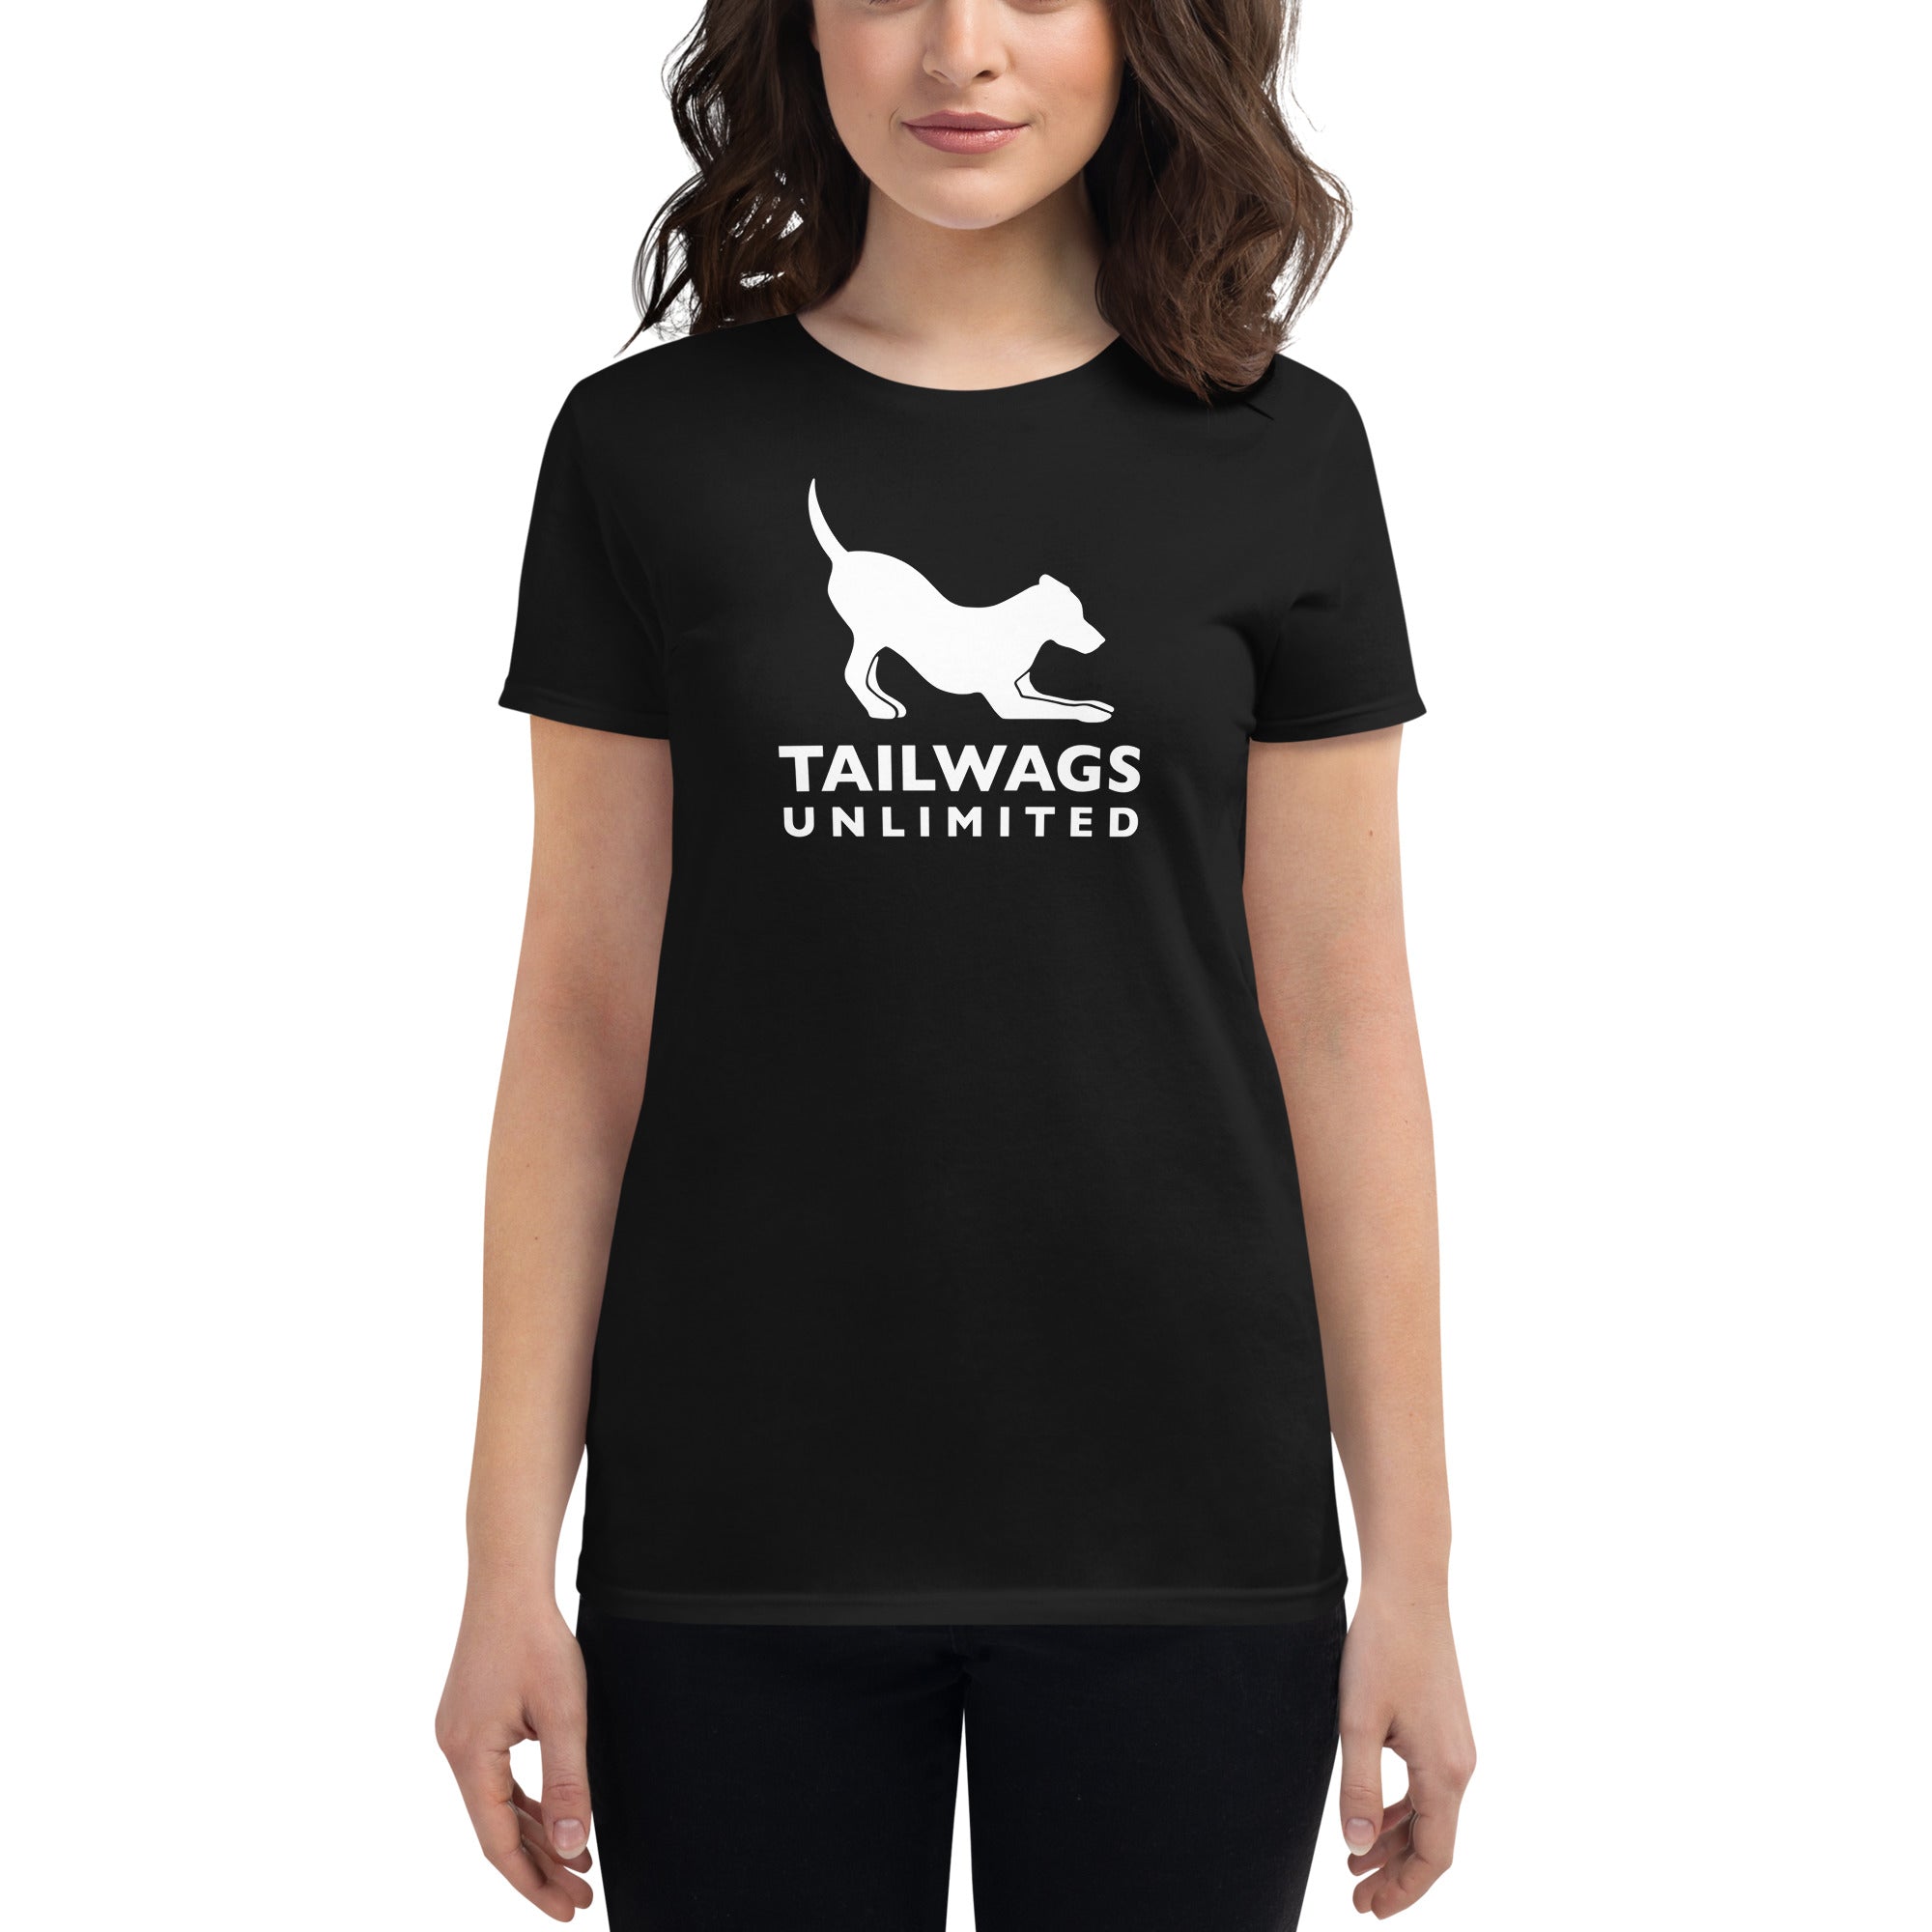 White Logo Women's Fit T-Shirt - TAILWAGS UNLIMITED